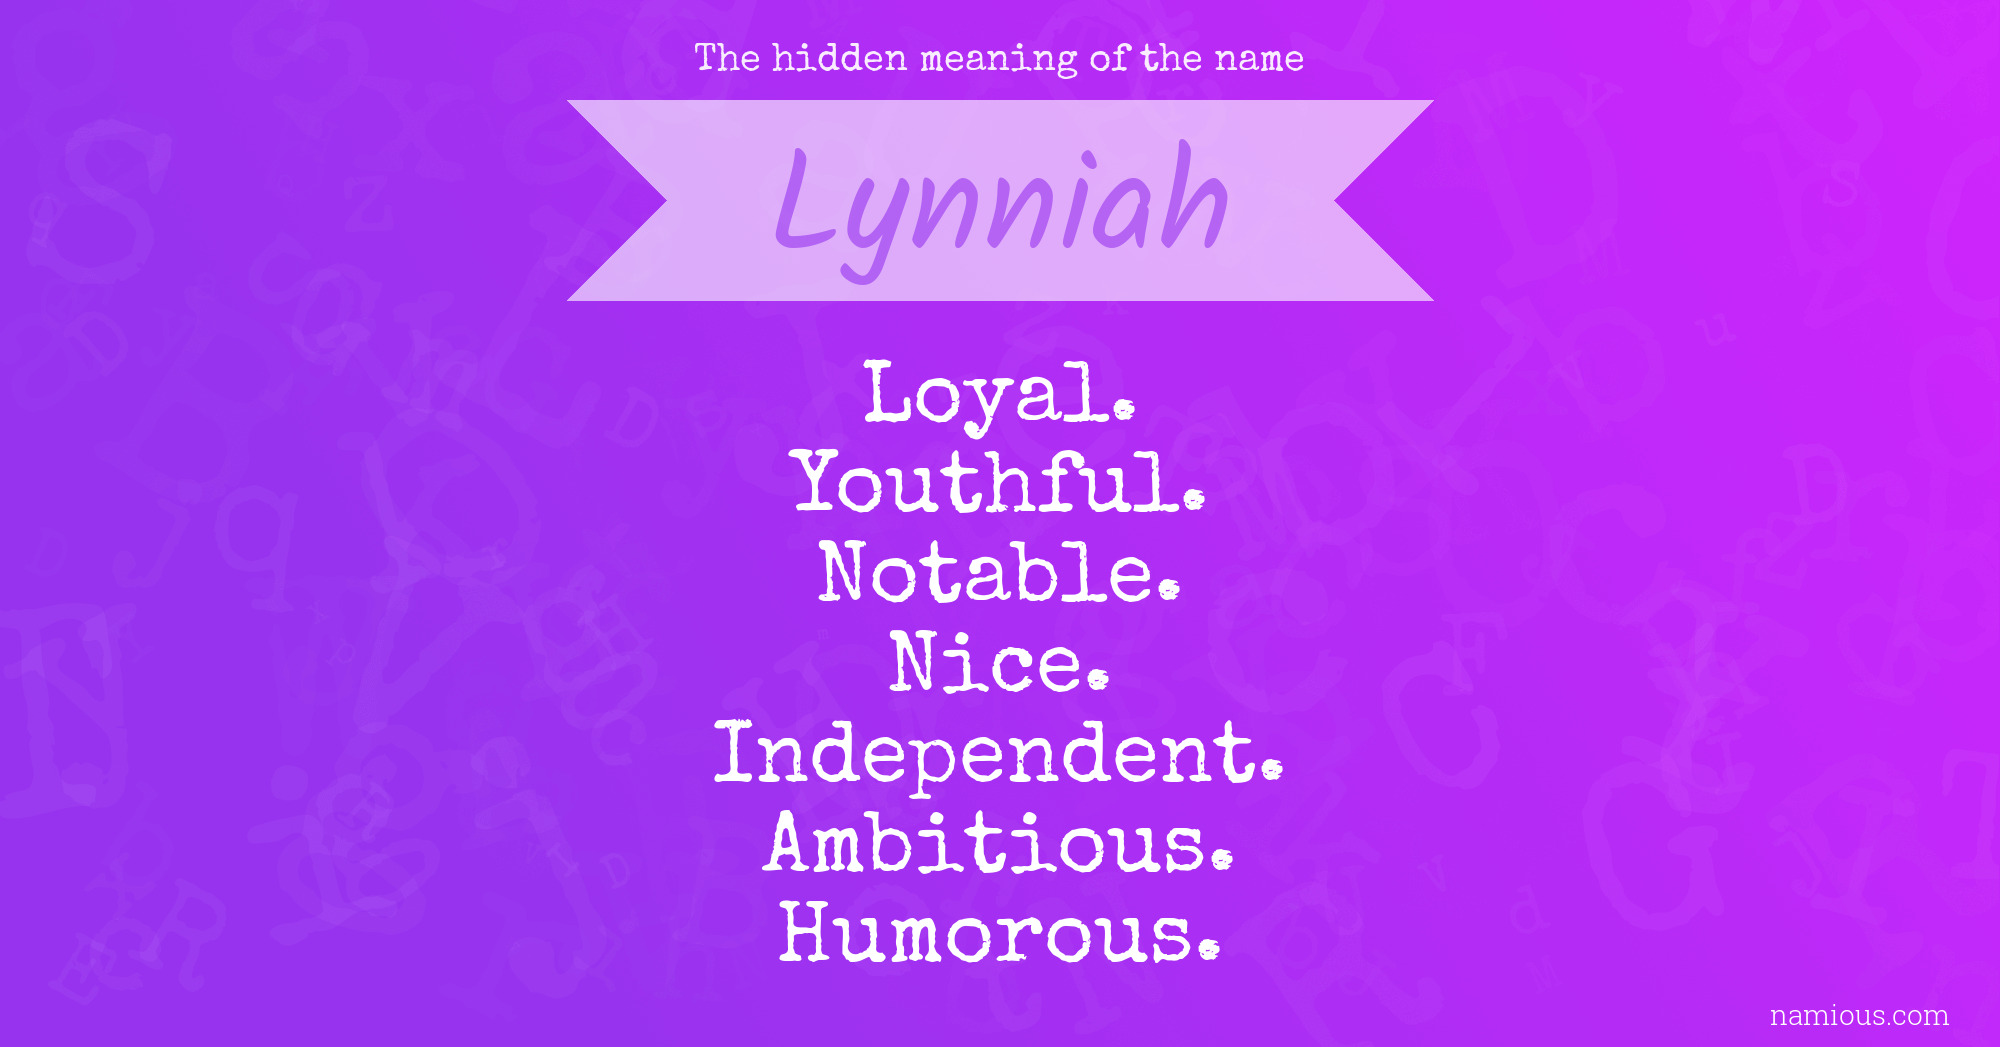 The hidden meaning of the name Lynniah